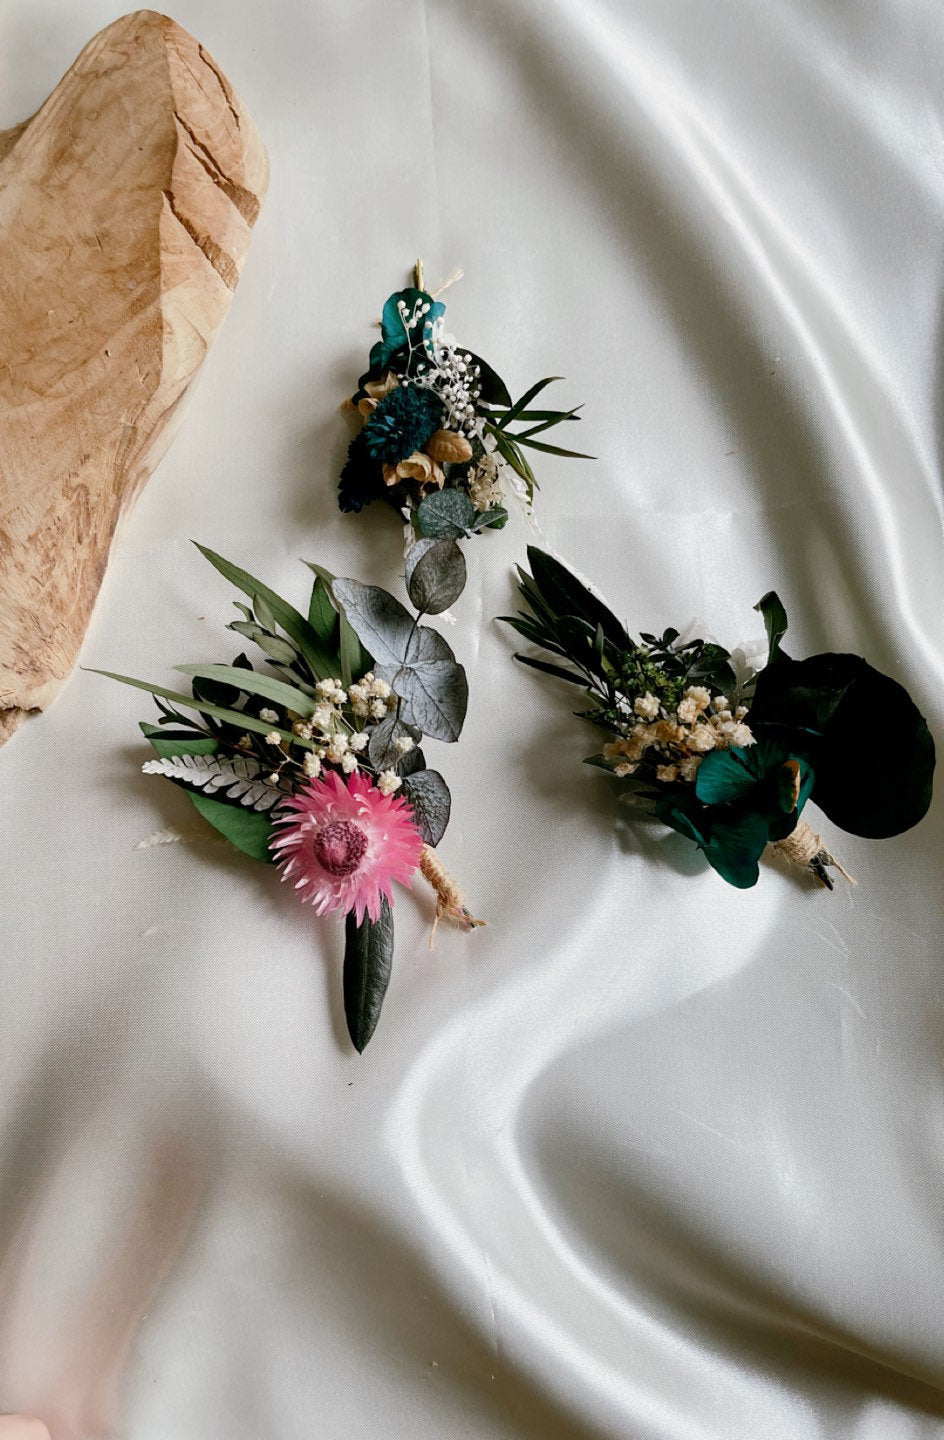 pack of 3 boutonniere Forest green, boutonniere preserved foliage mix dried flower, bridal accessories, wedding DYI